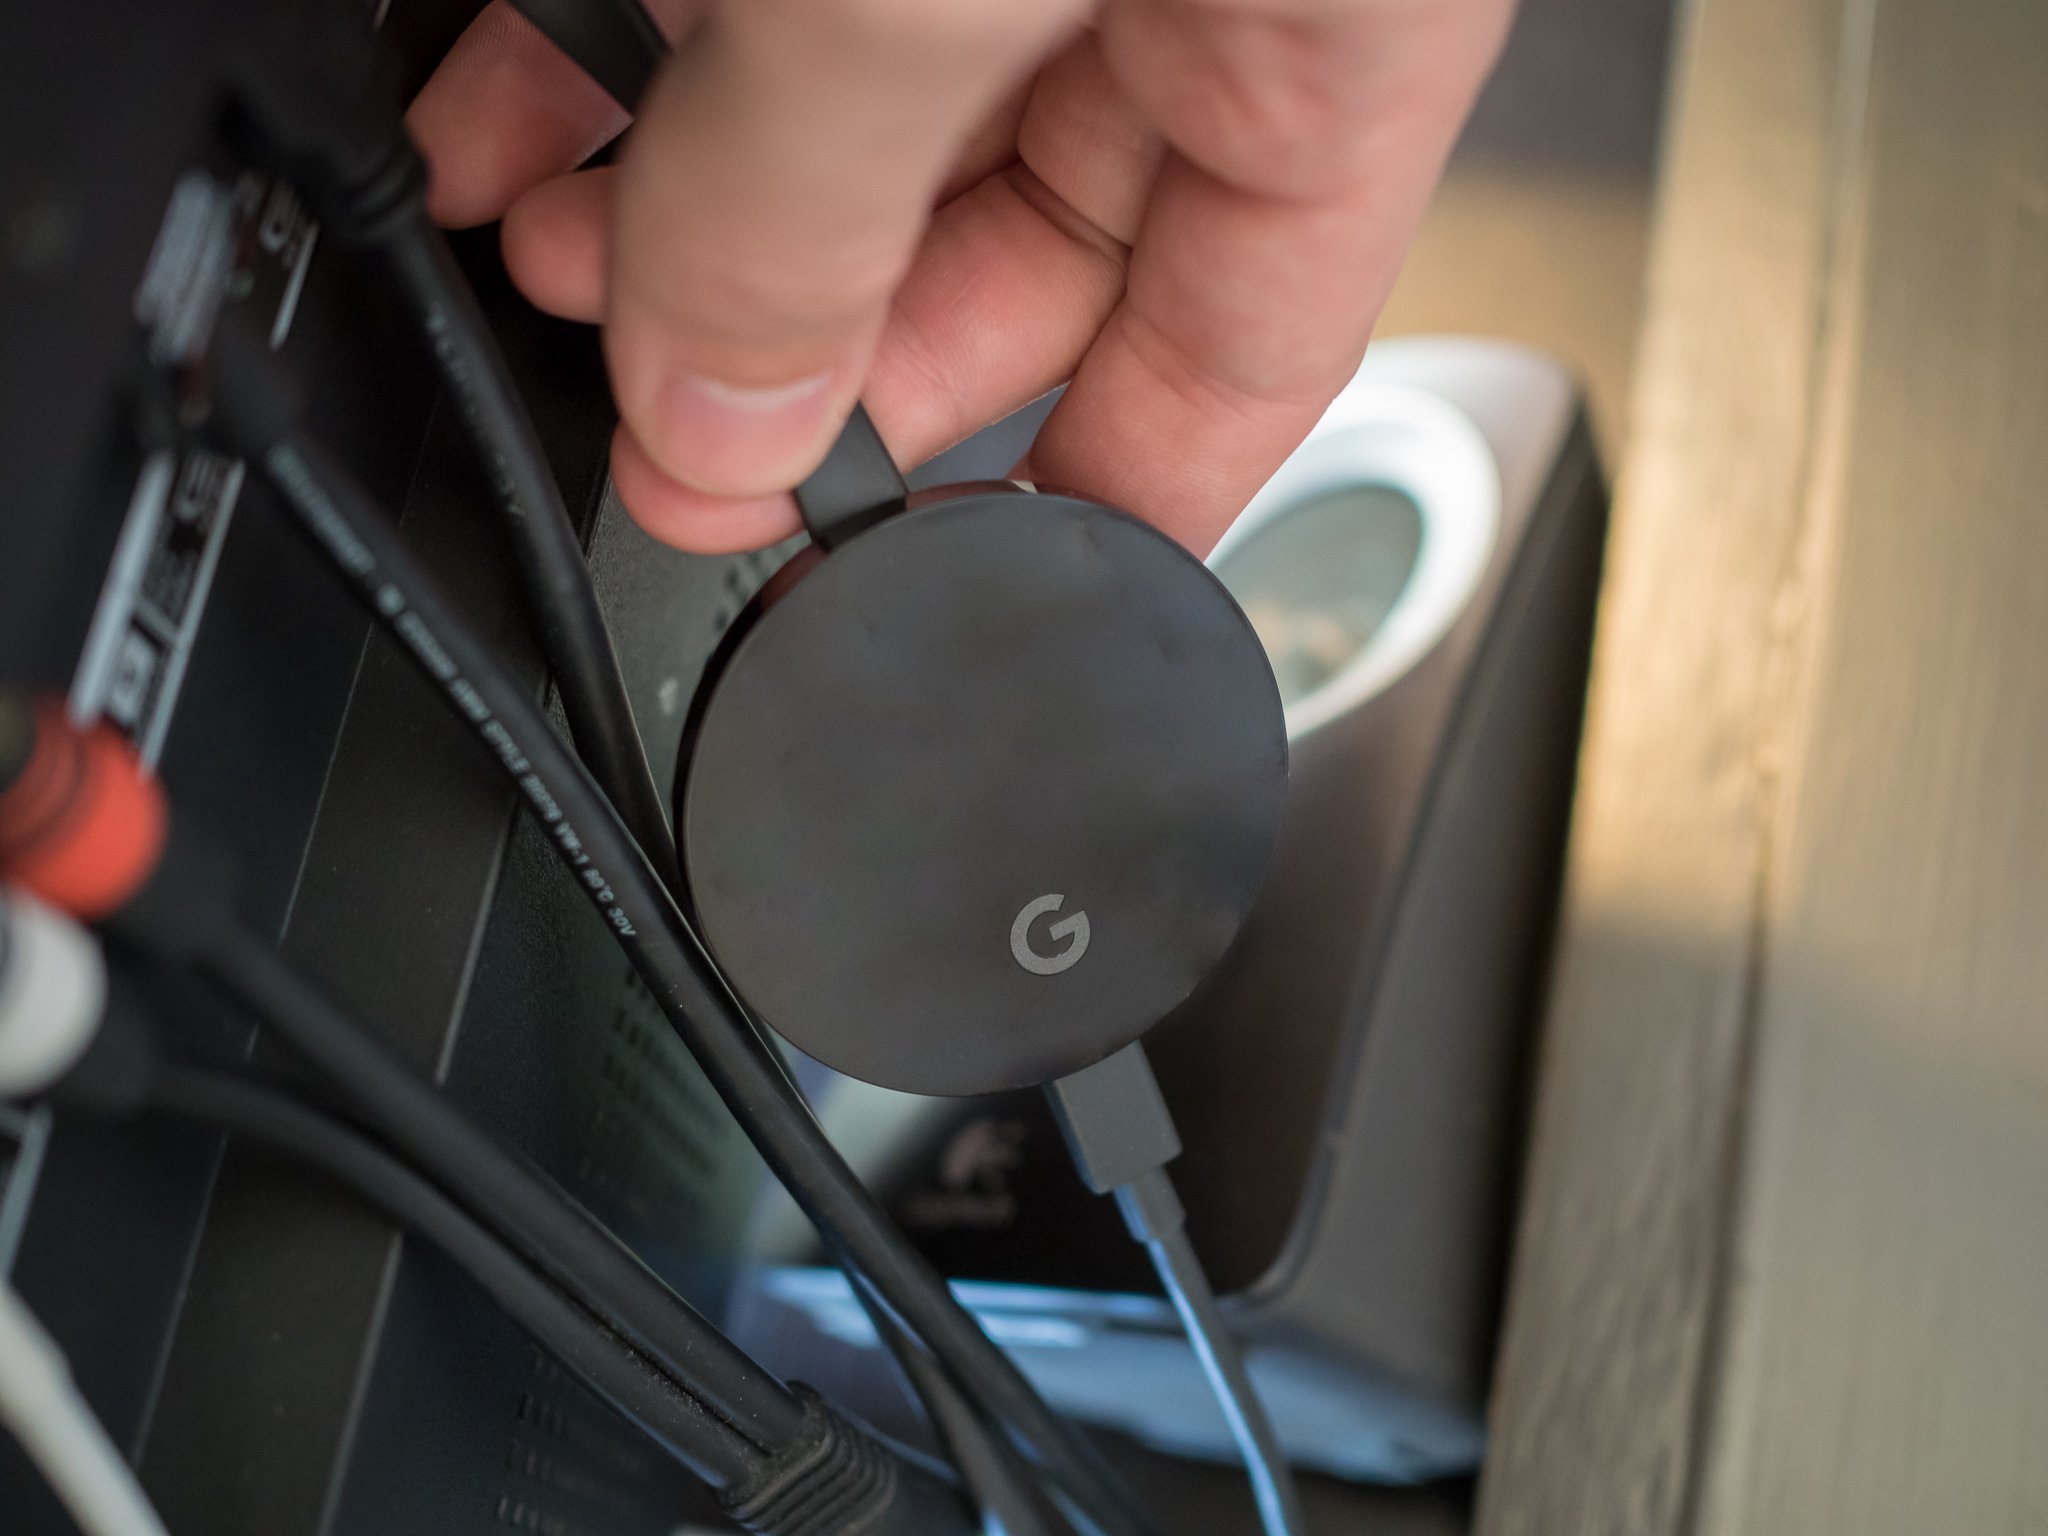 How To Connect Chromecast To Wi-Fi Without Google Home